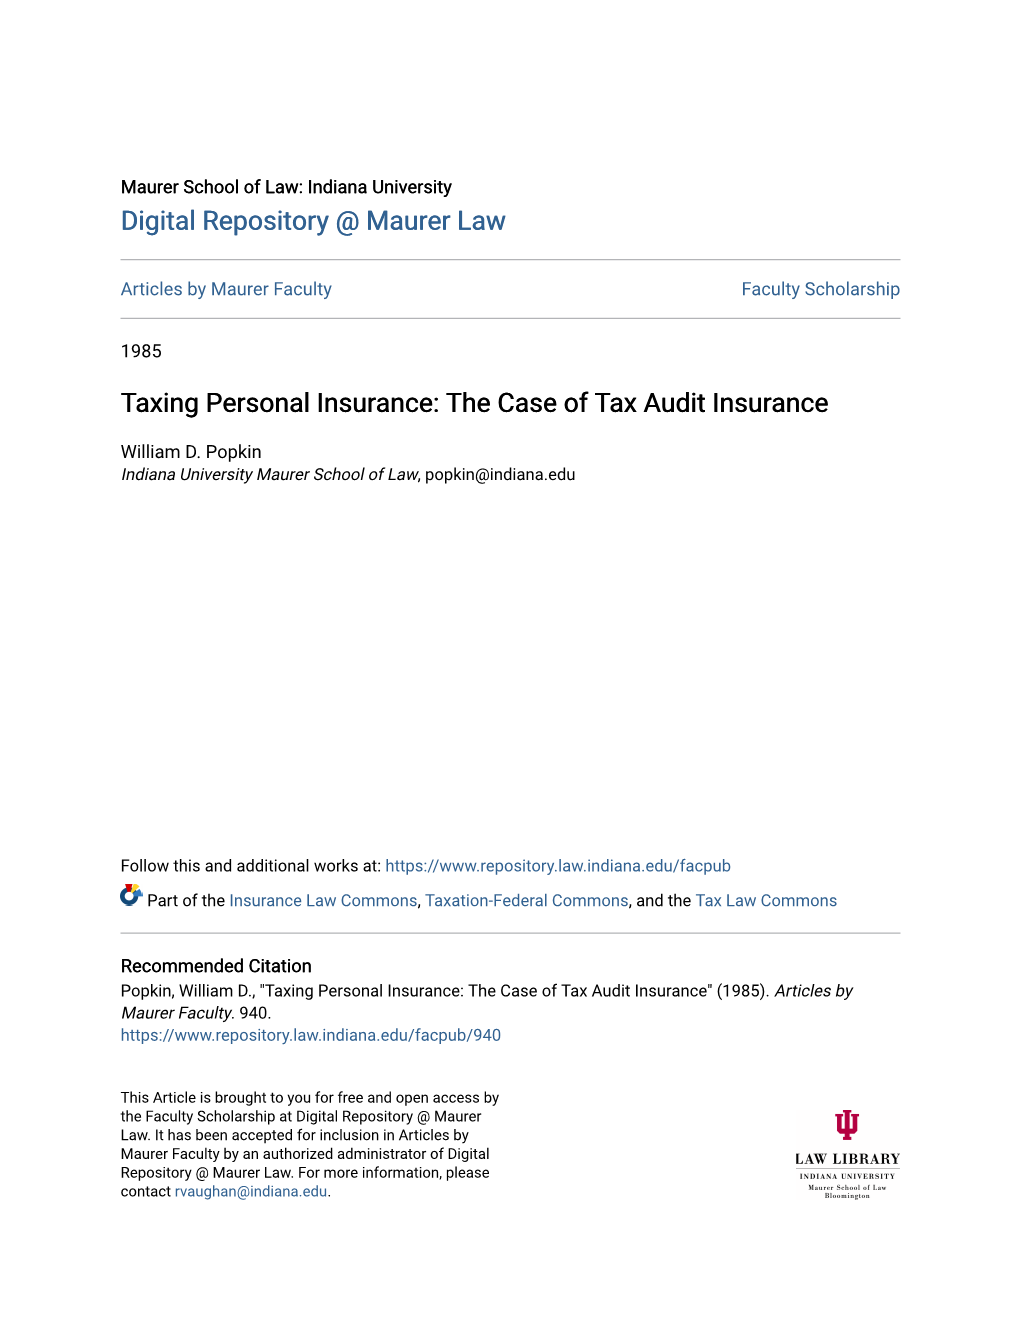 The Case of Tax Audit Insurance